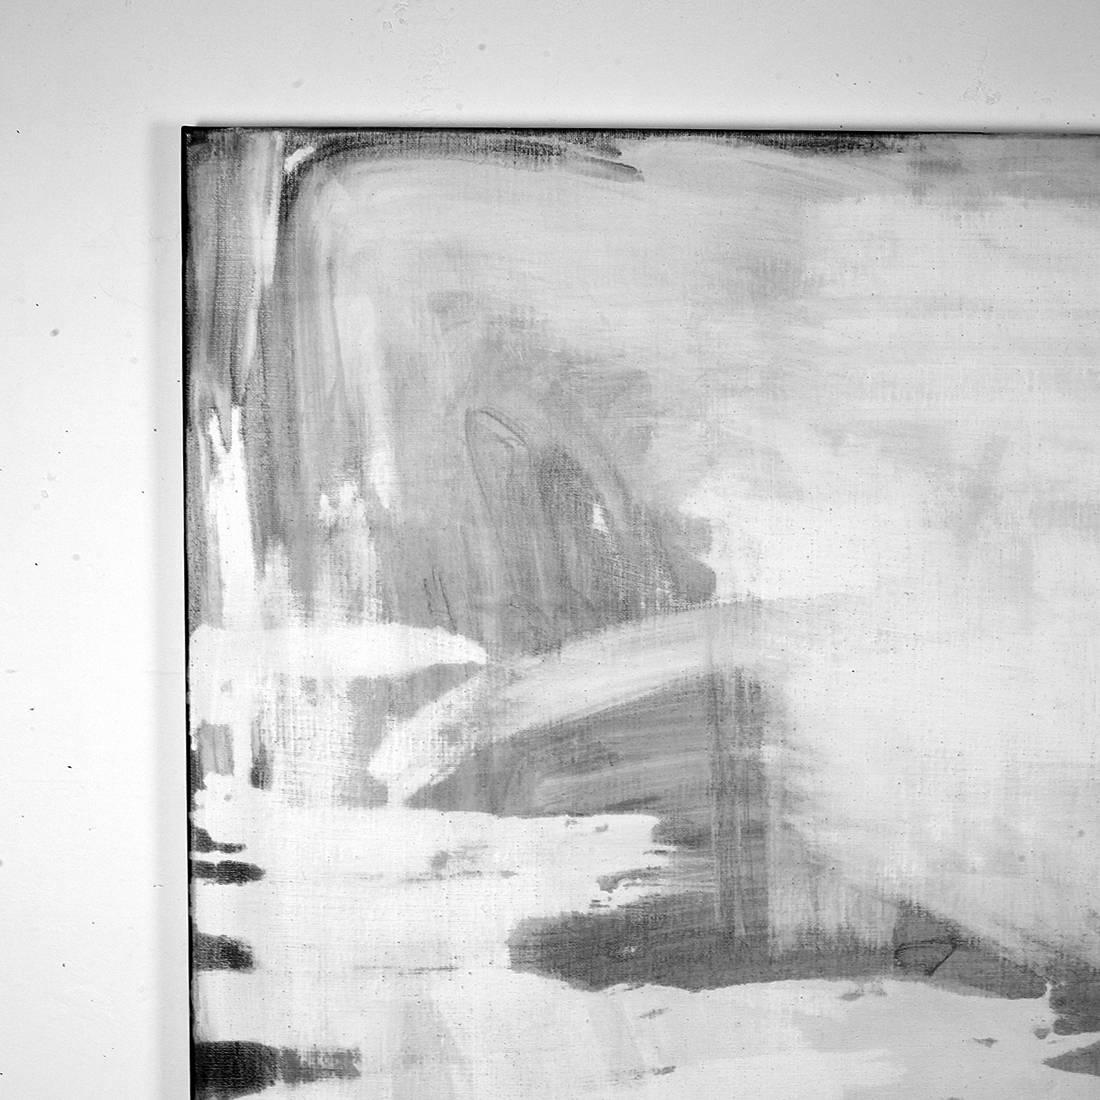 Artist Kirsten Hutsch takes a clear approach to the process and materiality of her work. Her paintings examine the very foundation of what we see and in this particular work the domestic actions that take place in our homes. 'Ink Wash # 7' captures